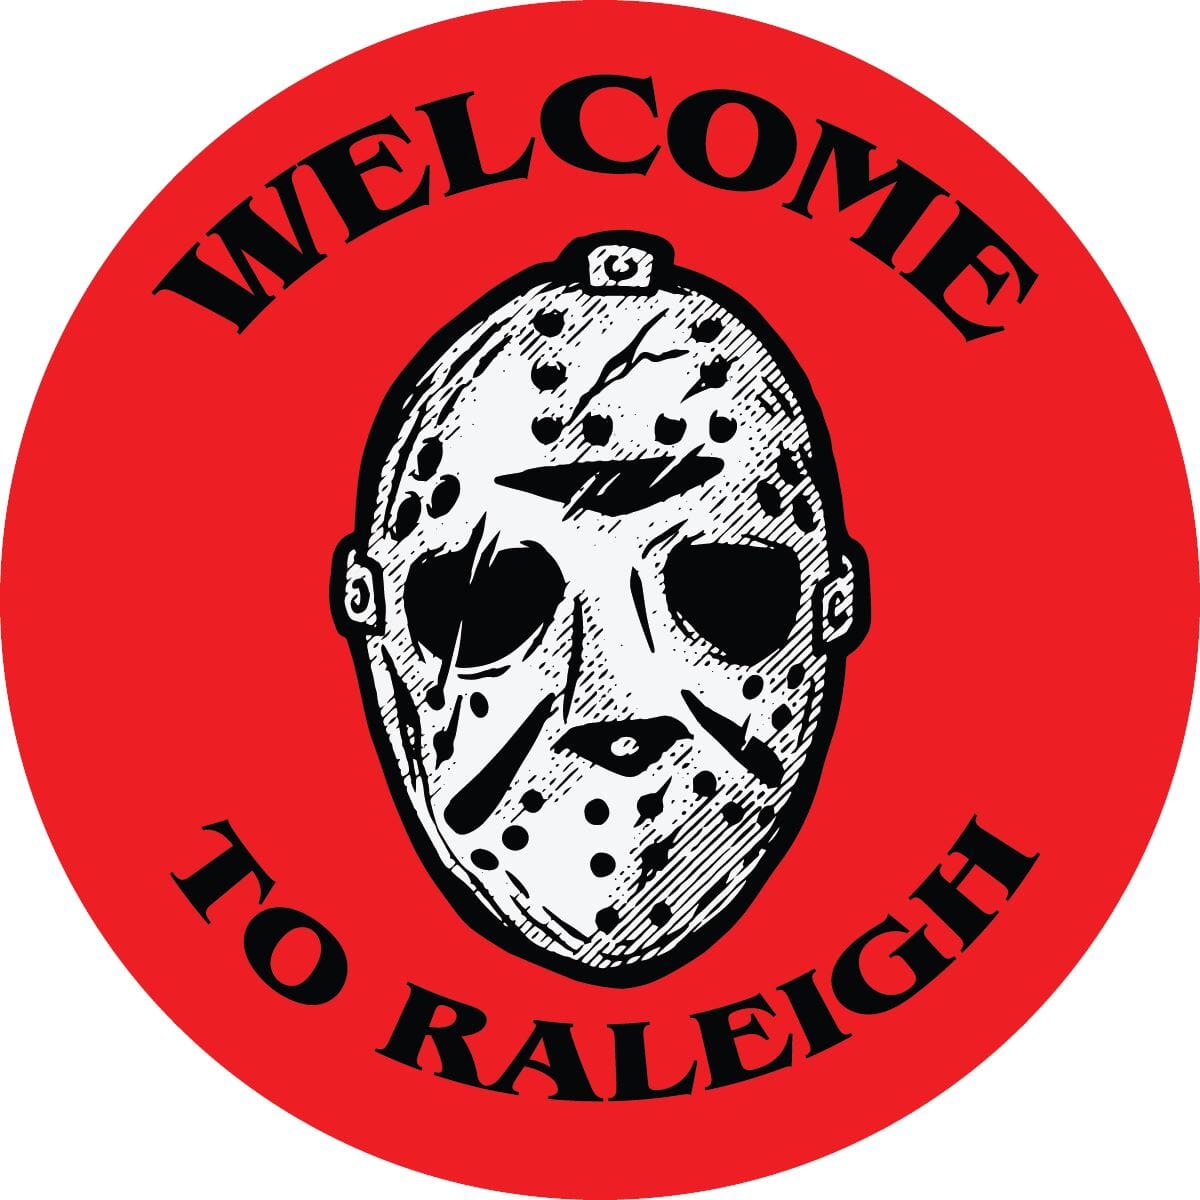 Welcome to Raleigh Hockey Shirt SHIRT HOUSE OF SWANK